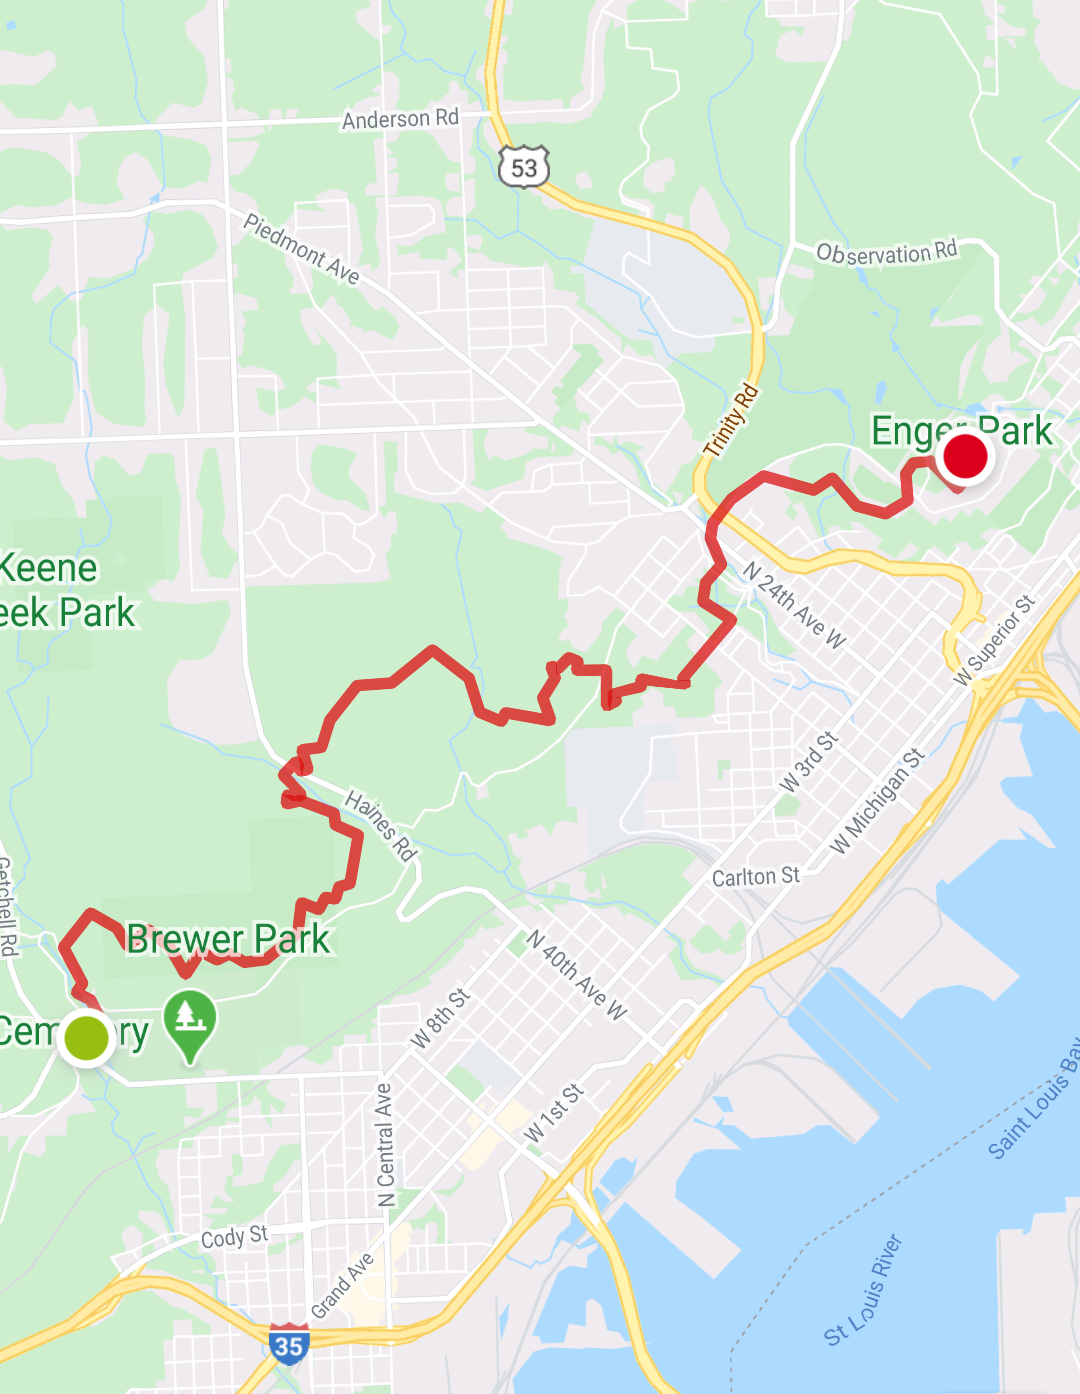 Map of my day hike along the Superior Hiking Trail - starting at Skyline Trailhead and ending at Enger Tower 